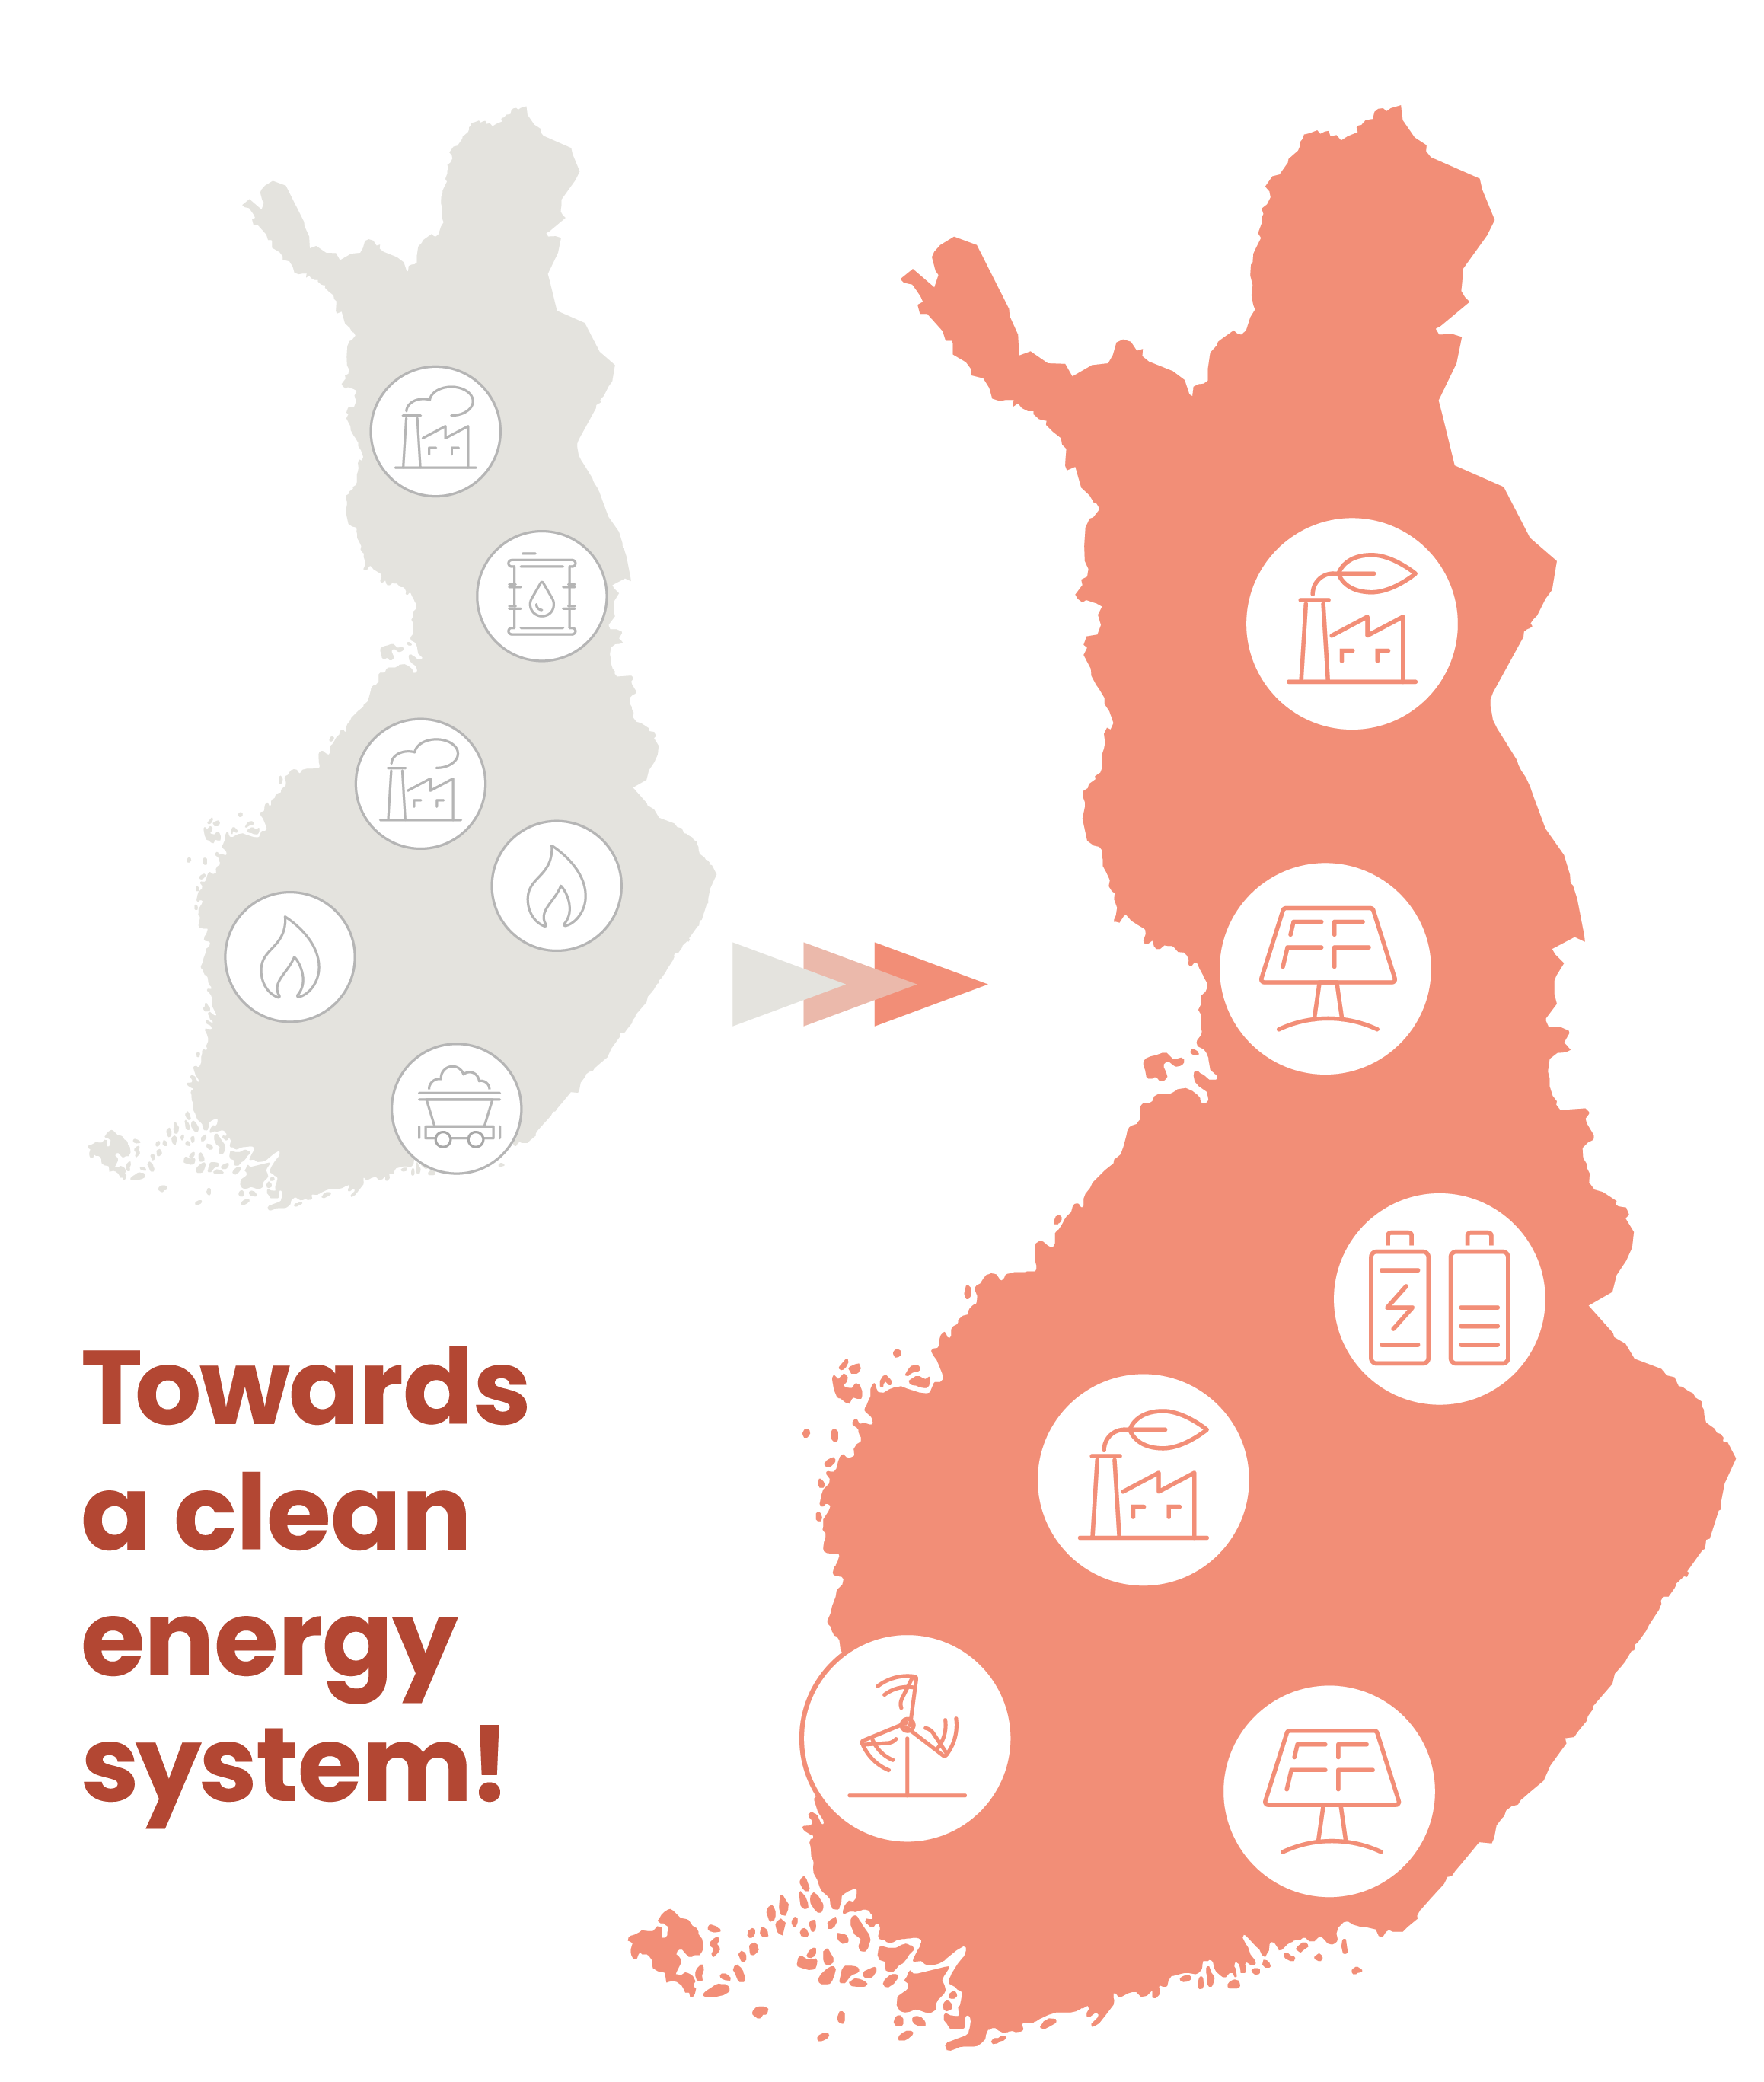 Towards a clean energy system!